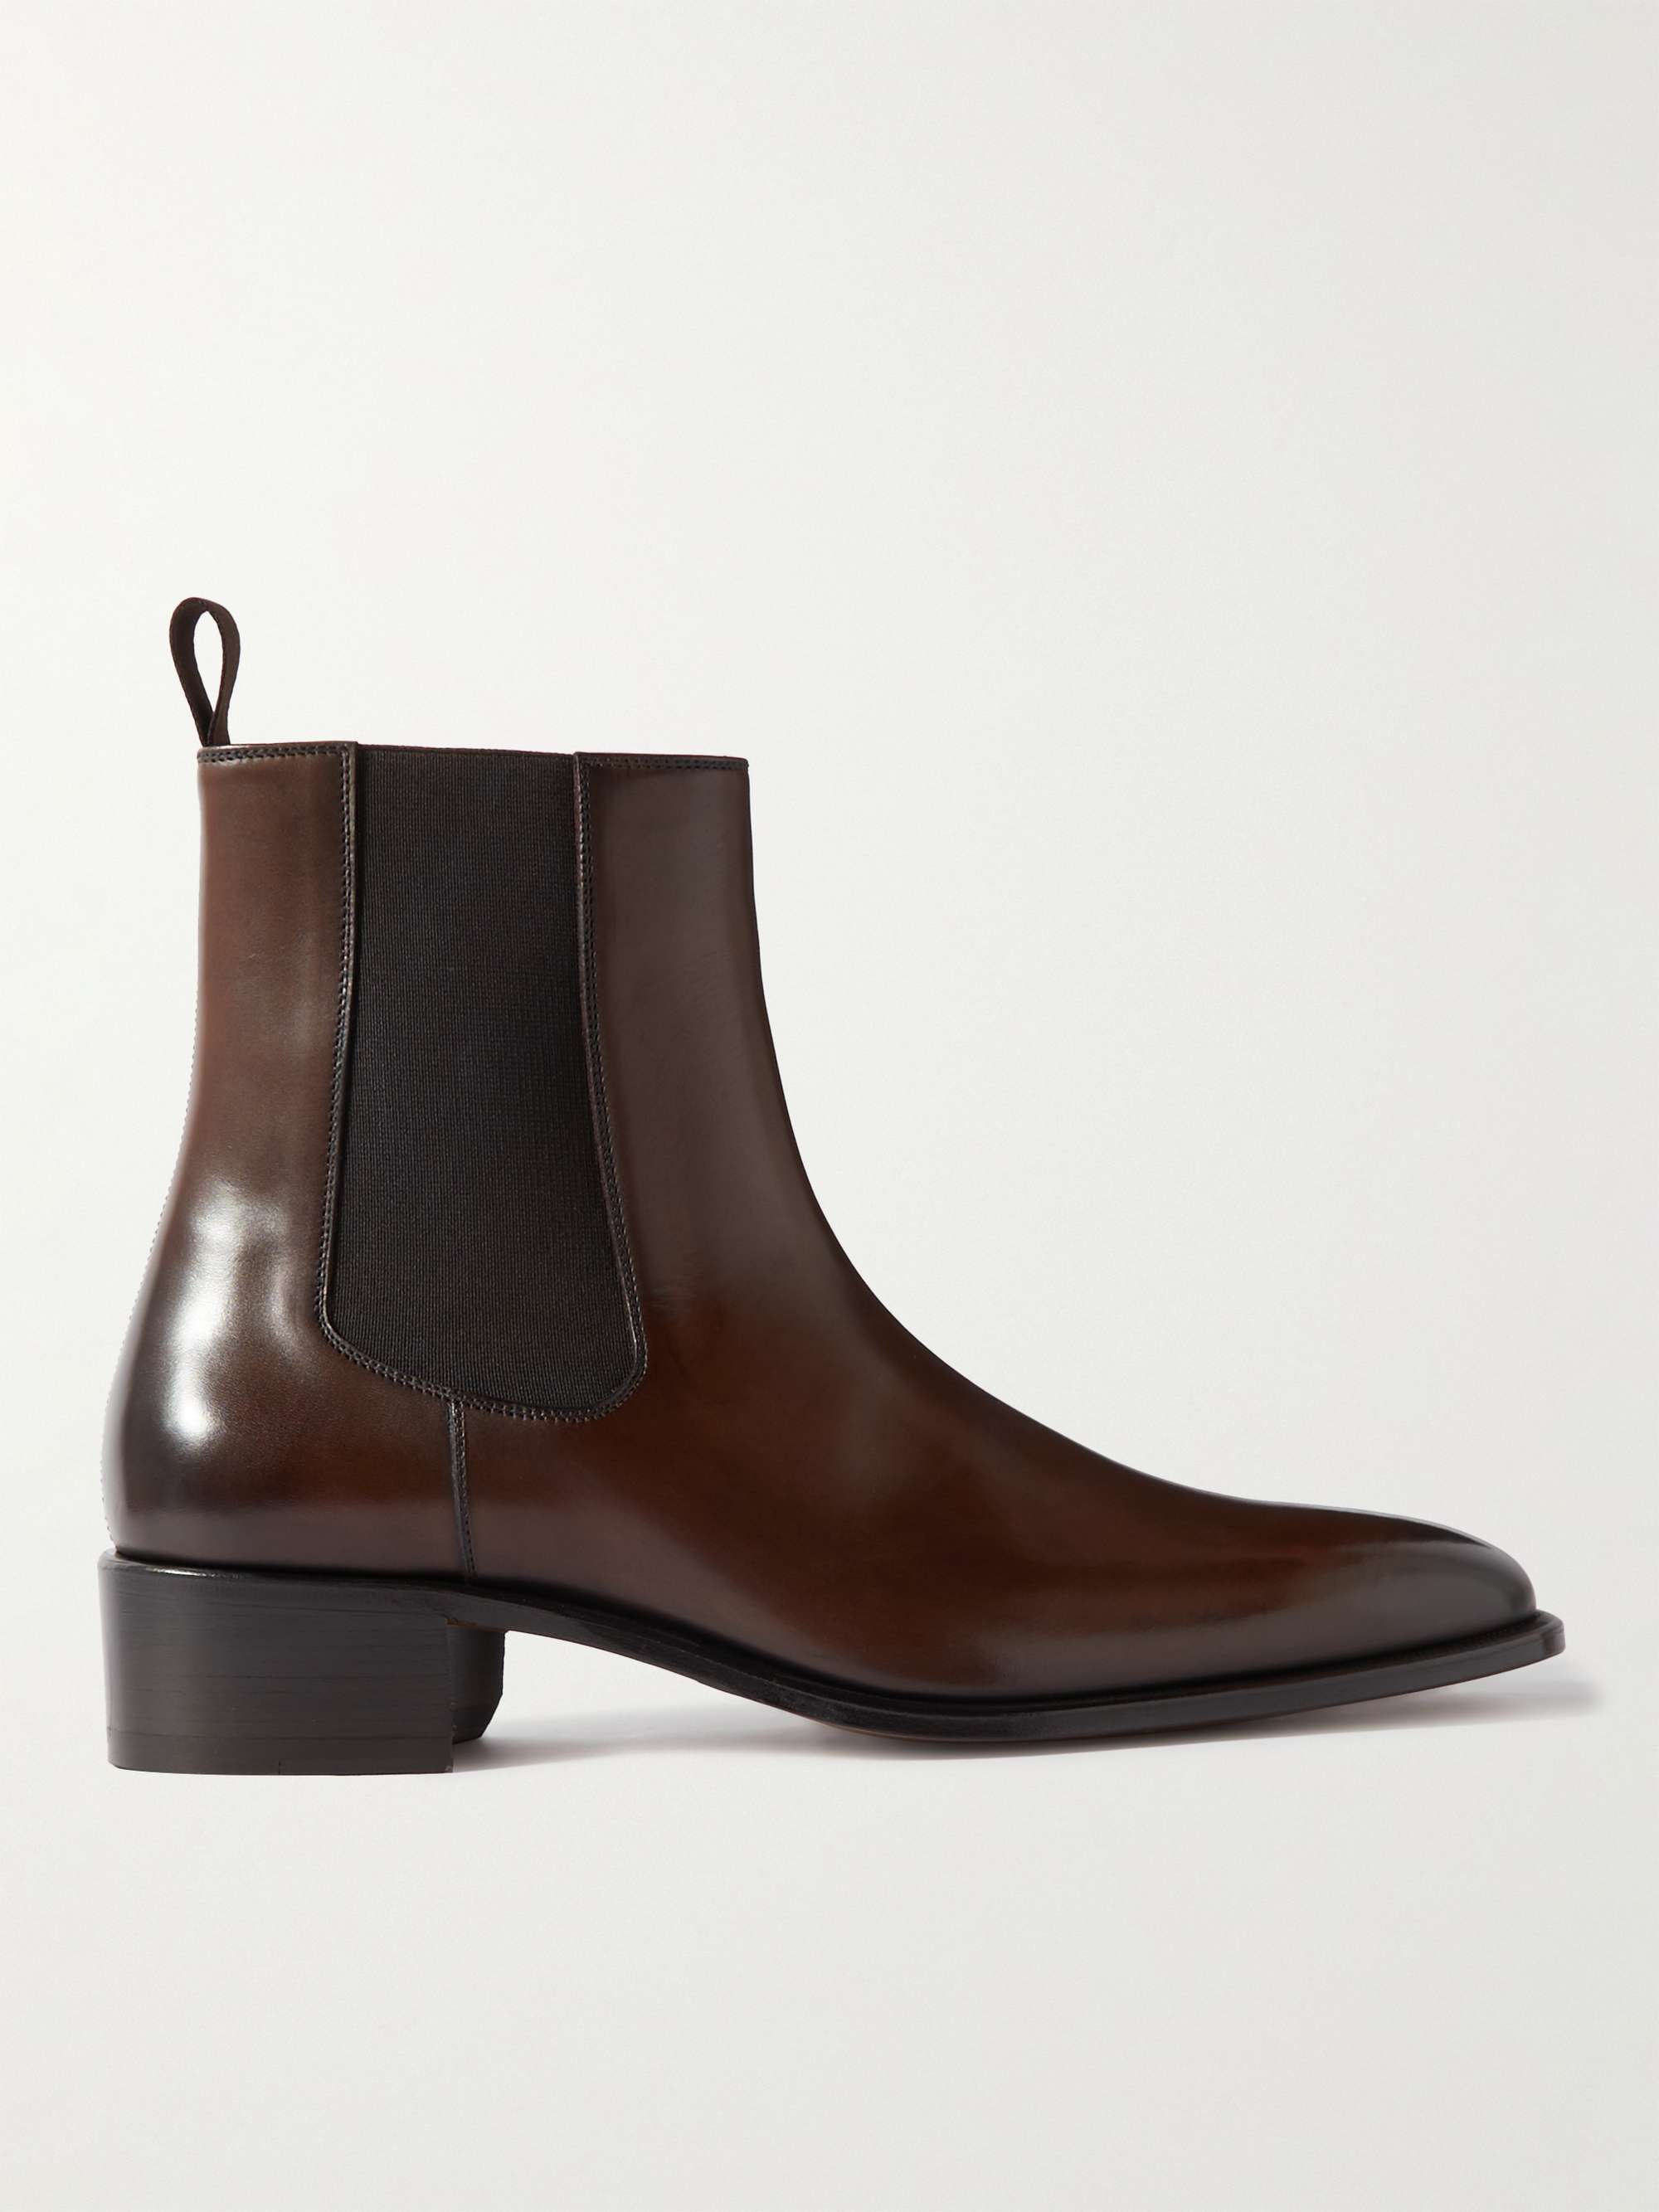 TOM FORD Alec Patent-Leather Chelsea Boots